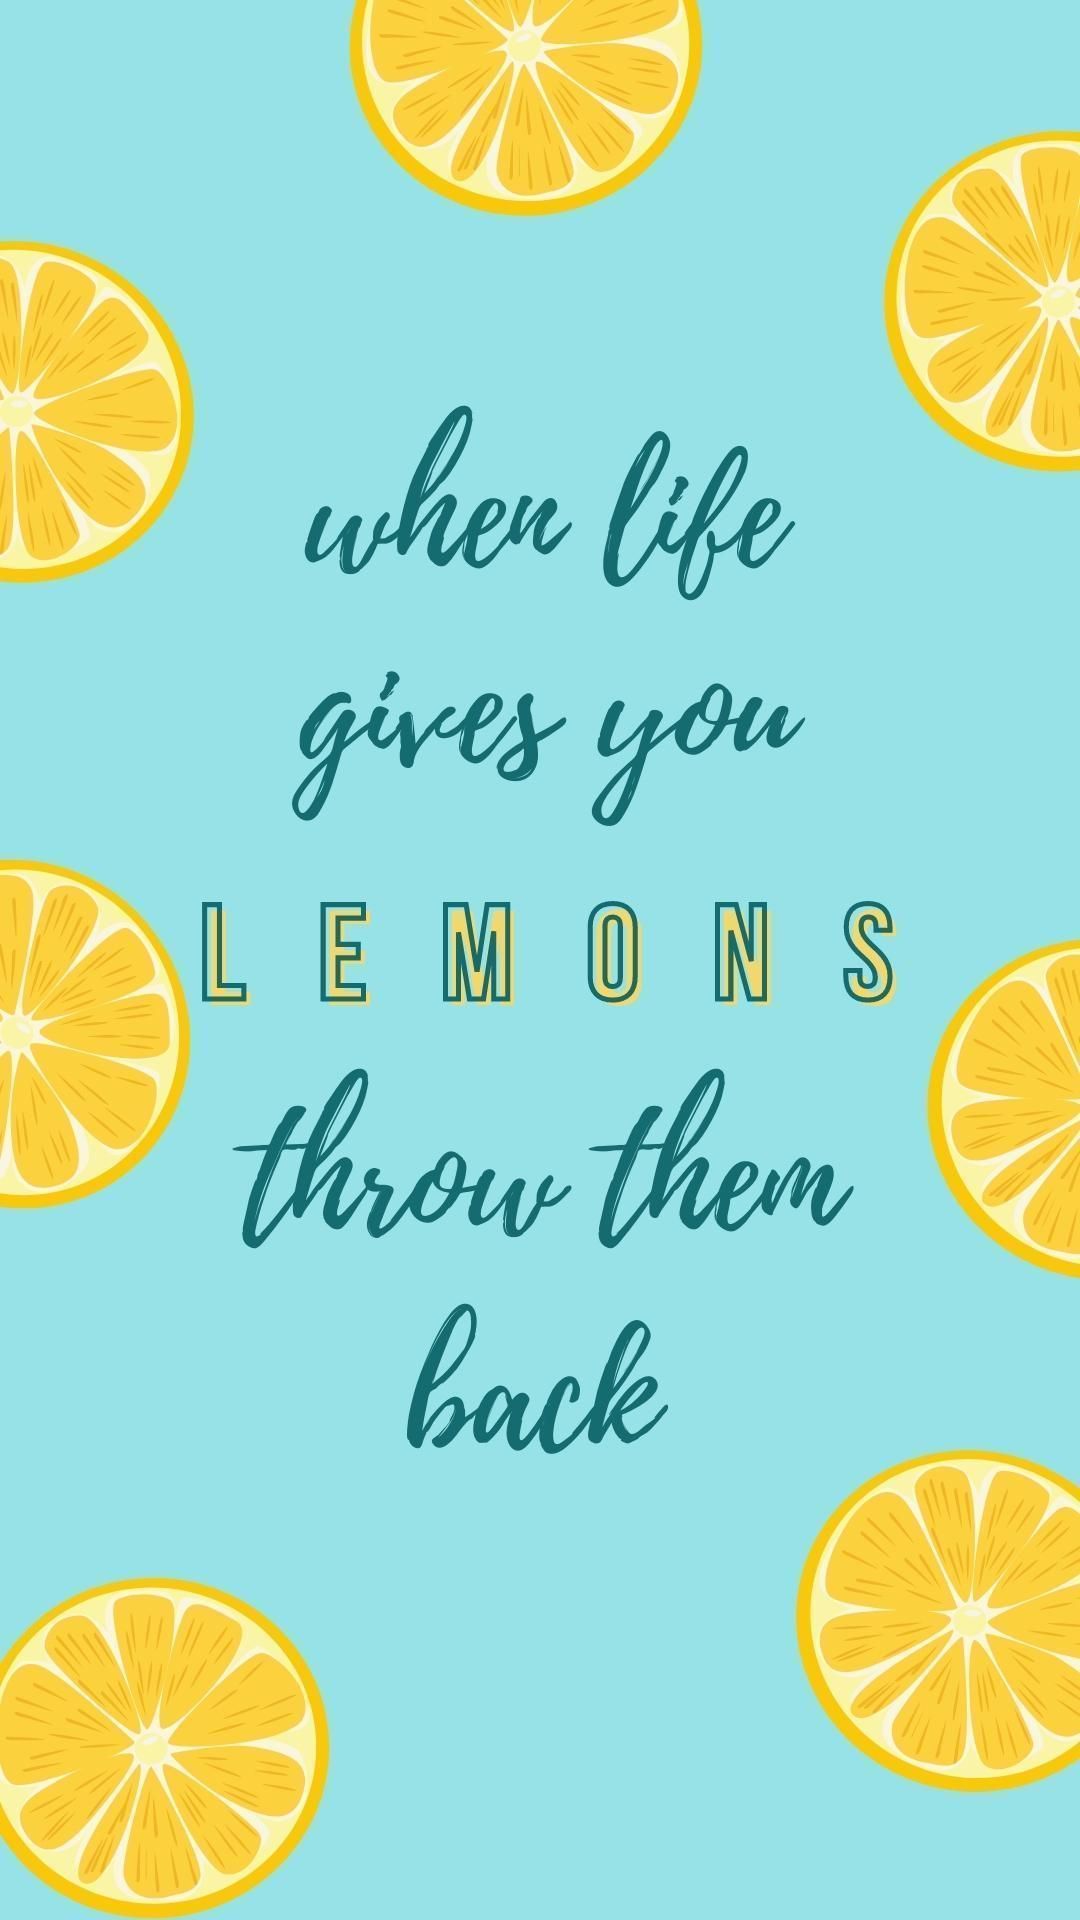 When life gives you lemons, throw them back. - Lemon, quotes